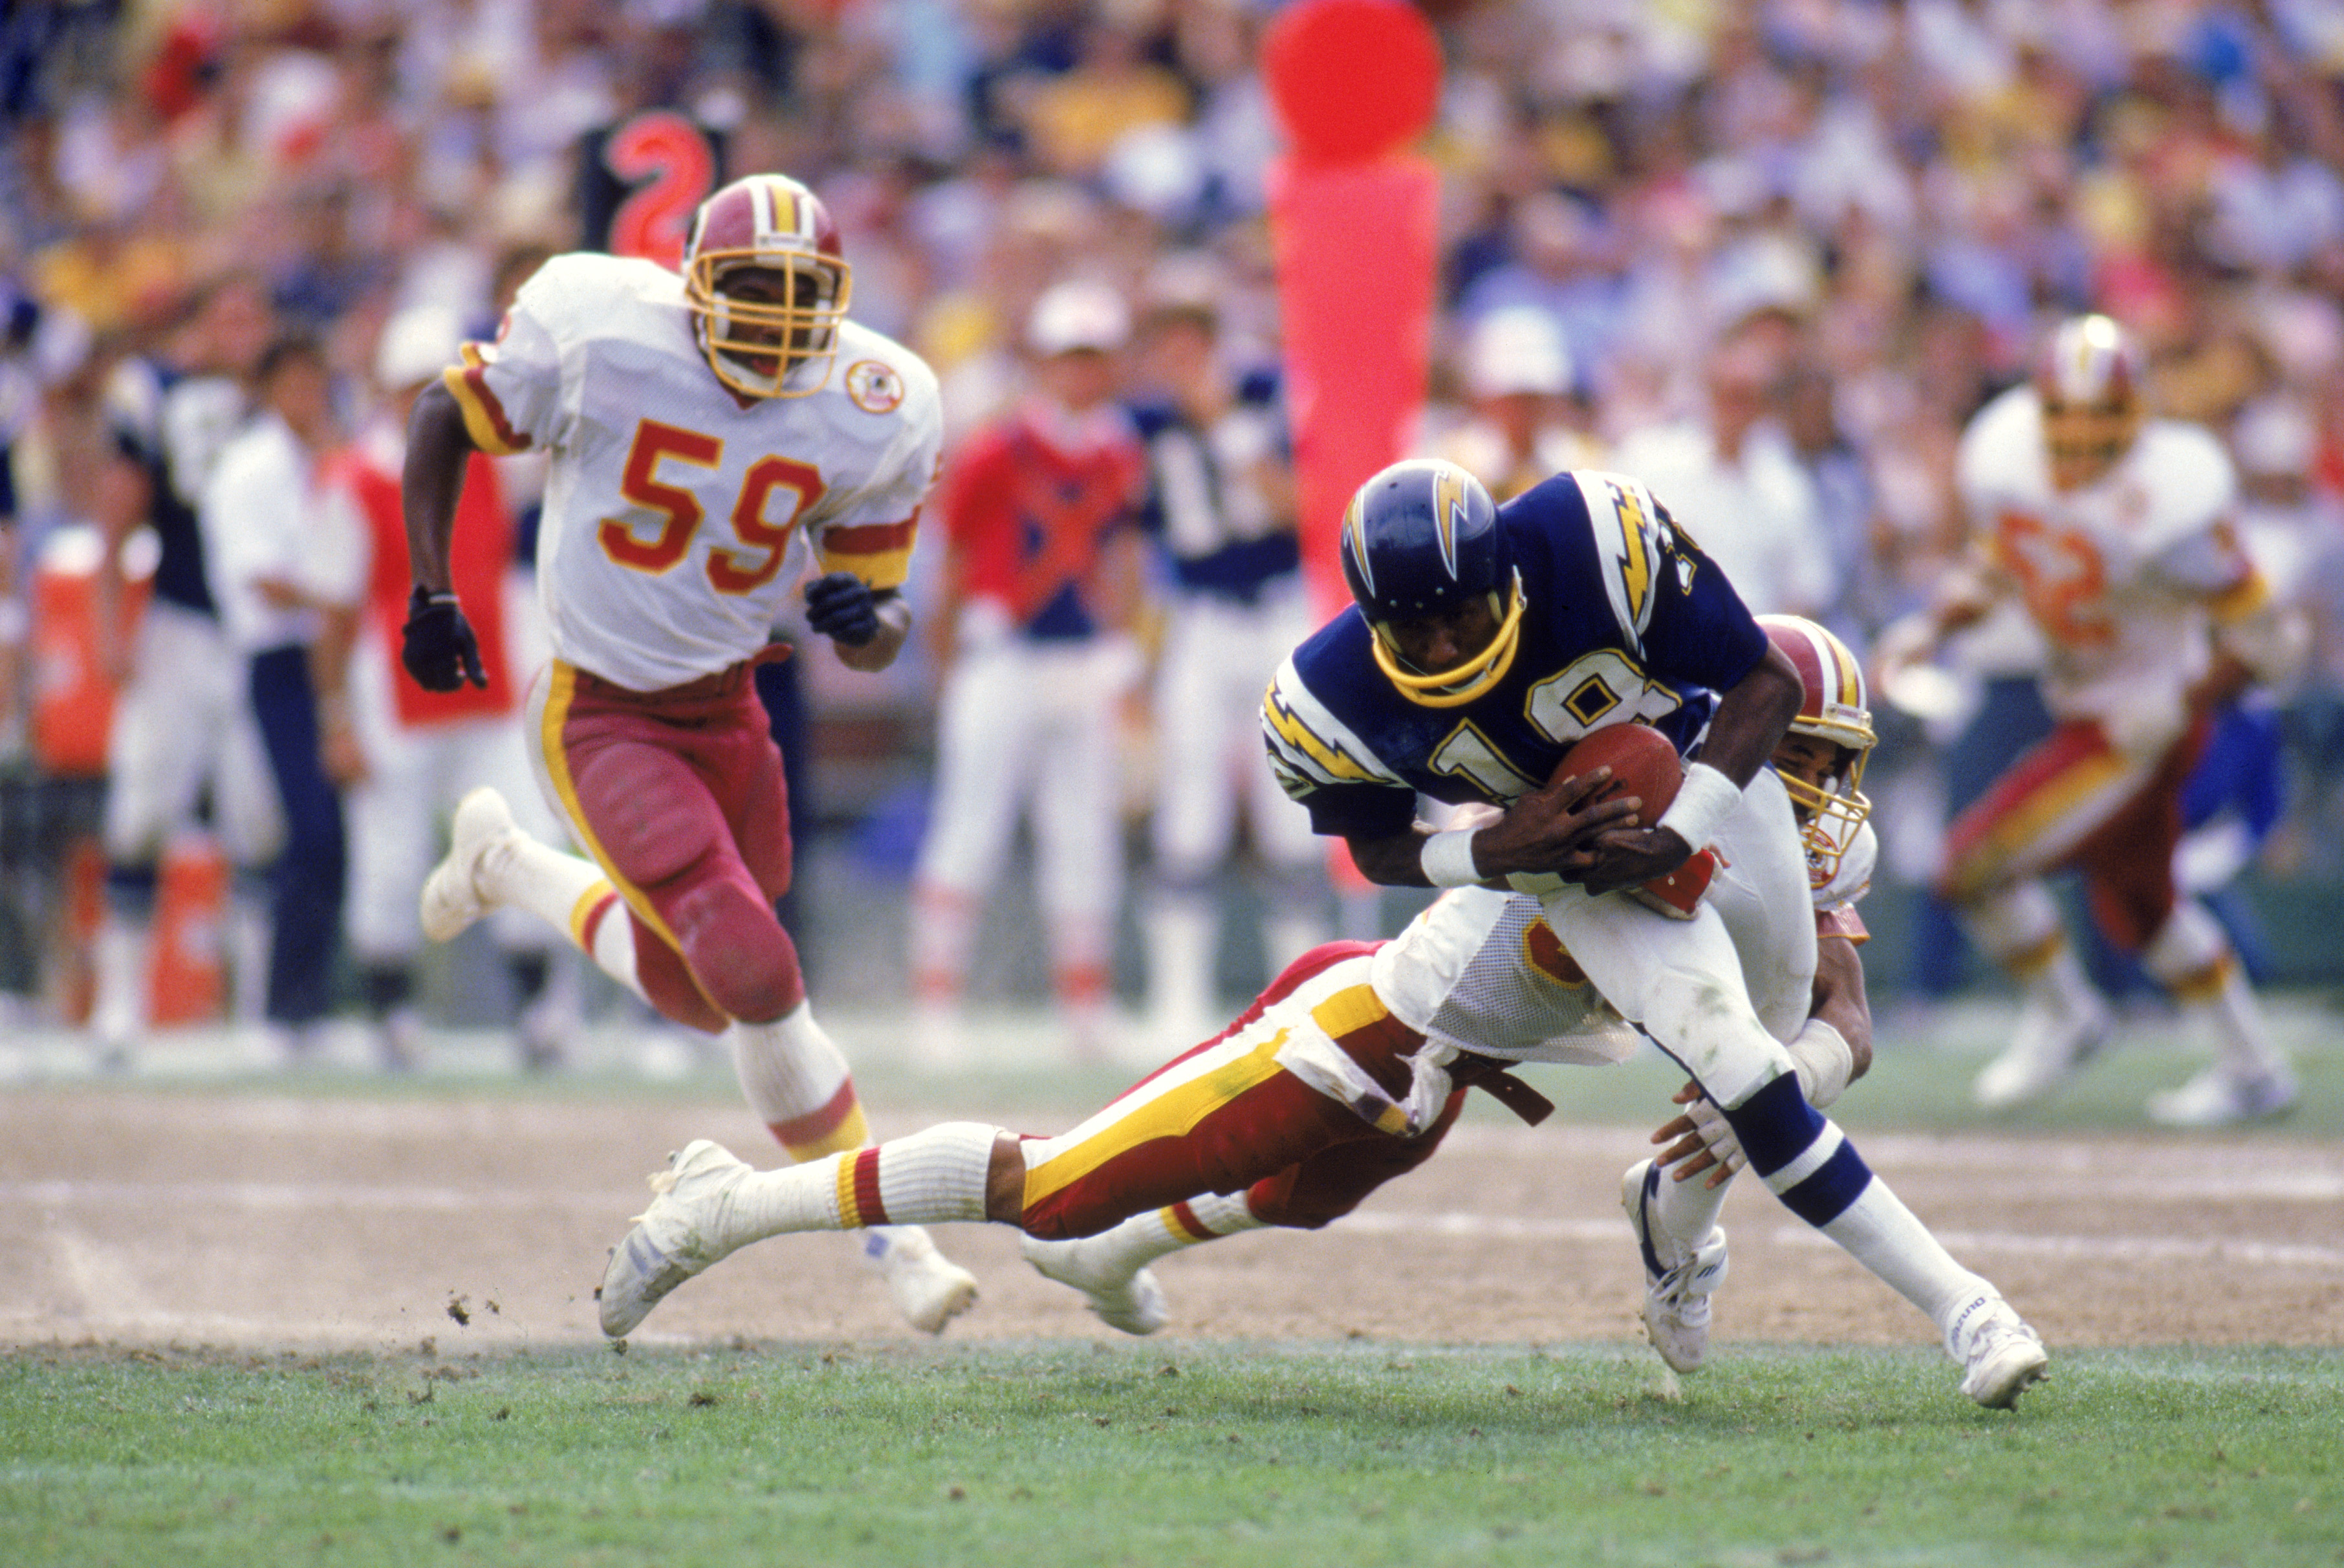 SAN DIEGO - 1985:  Wide receiver Charlie Joiner #18 of the San Diego Chargers runs with the ball as he is being tackled from behind during a game against the Washington Redskins in 1985 at Jack Murphy Stadium in San Diego, California.  (Photo by Rick Stew